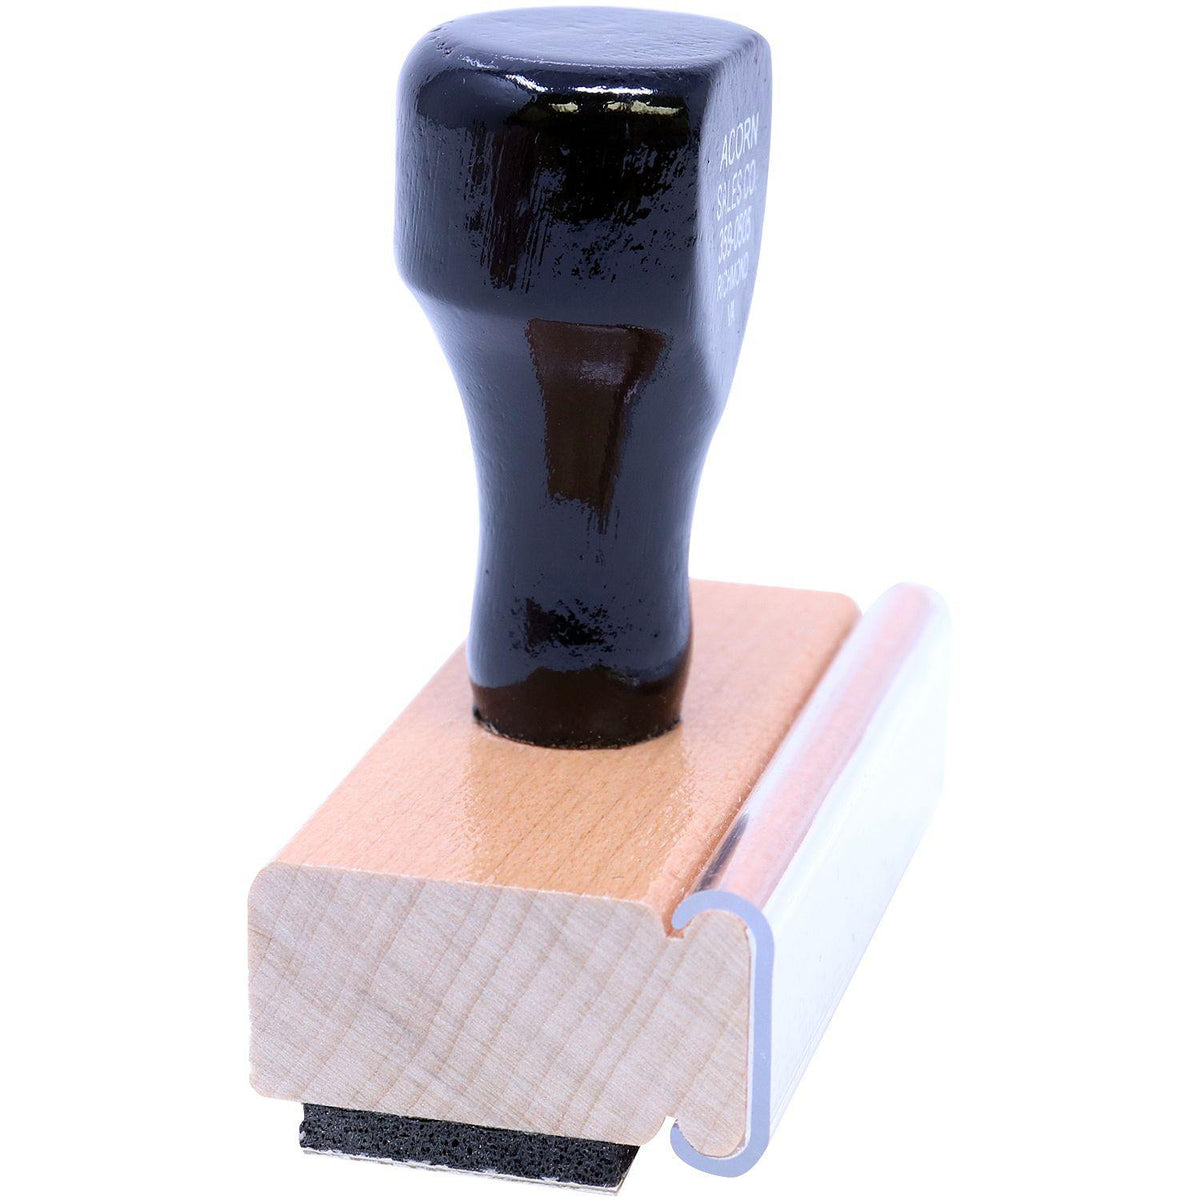 Side View of Allergies Rubber Stamp at an Angle